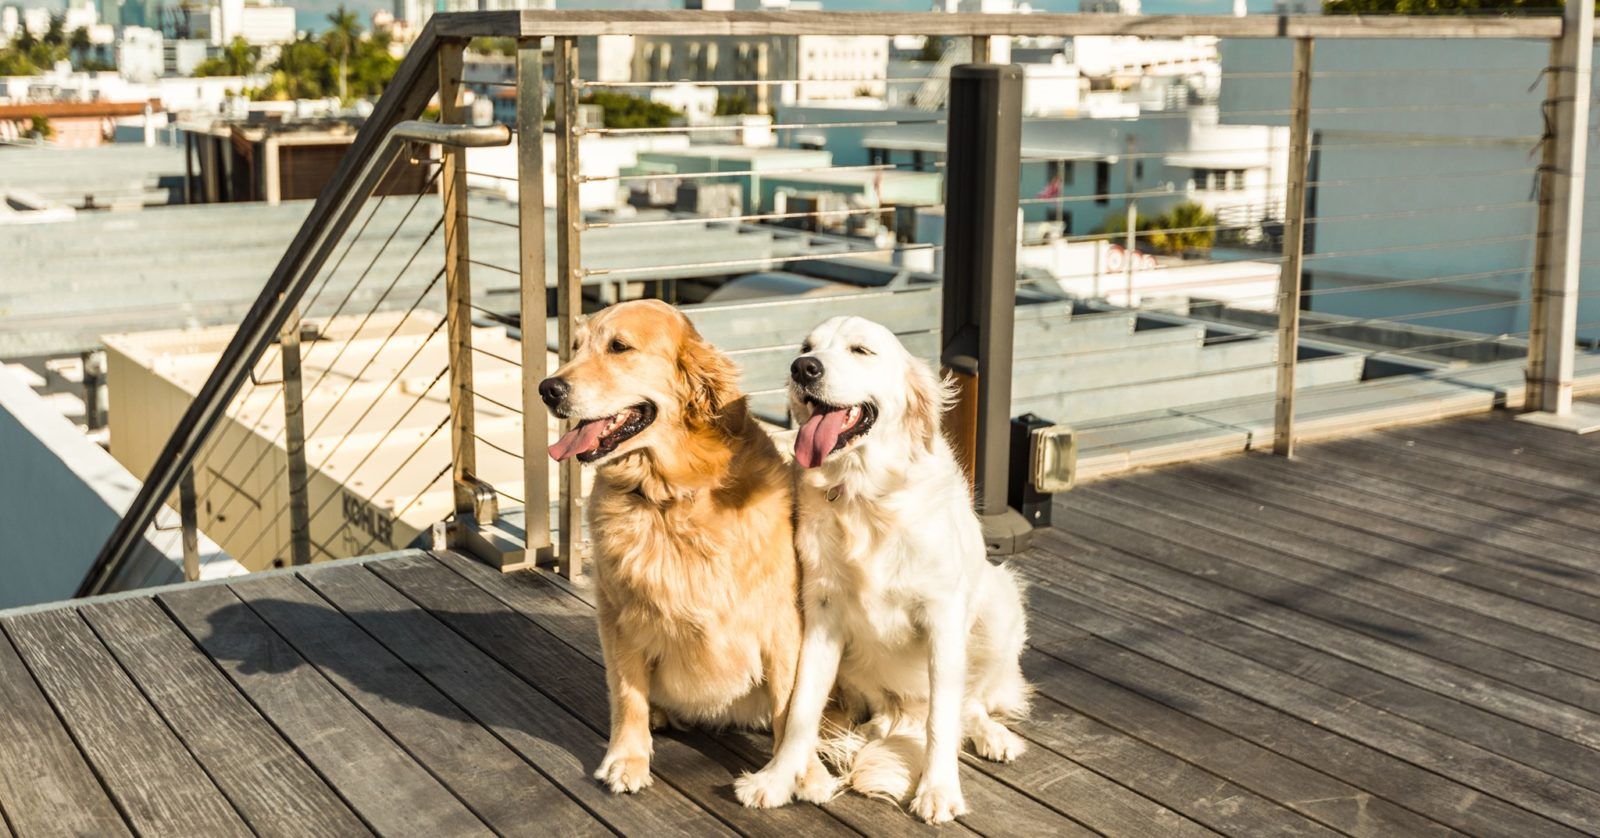 These luxury hotels around the world have the cutest animals in residence